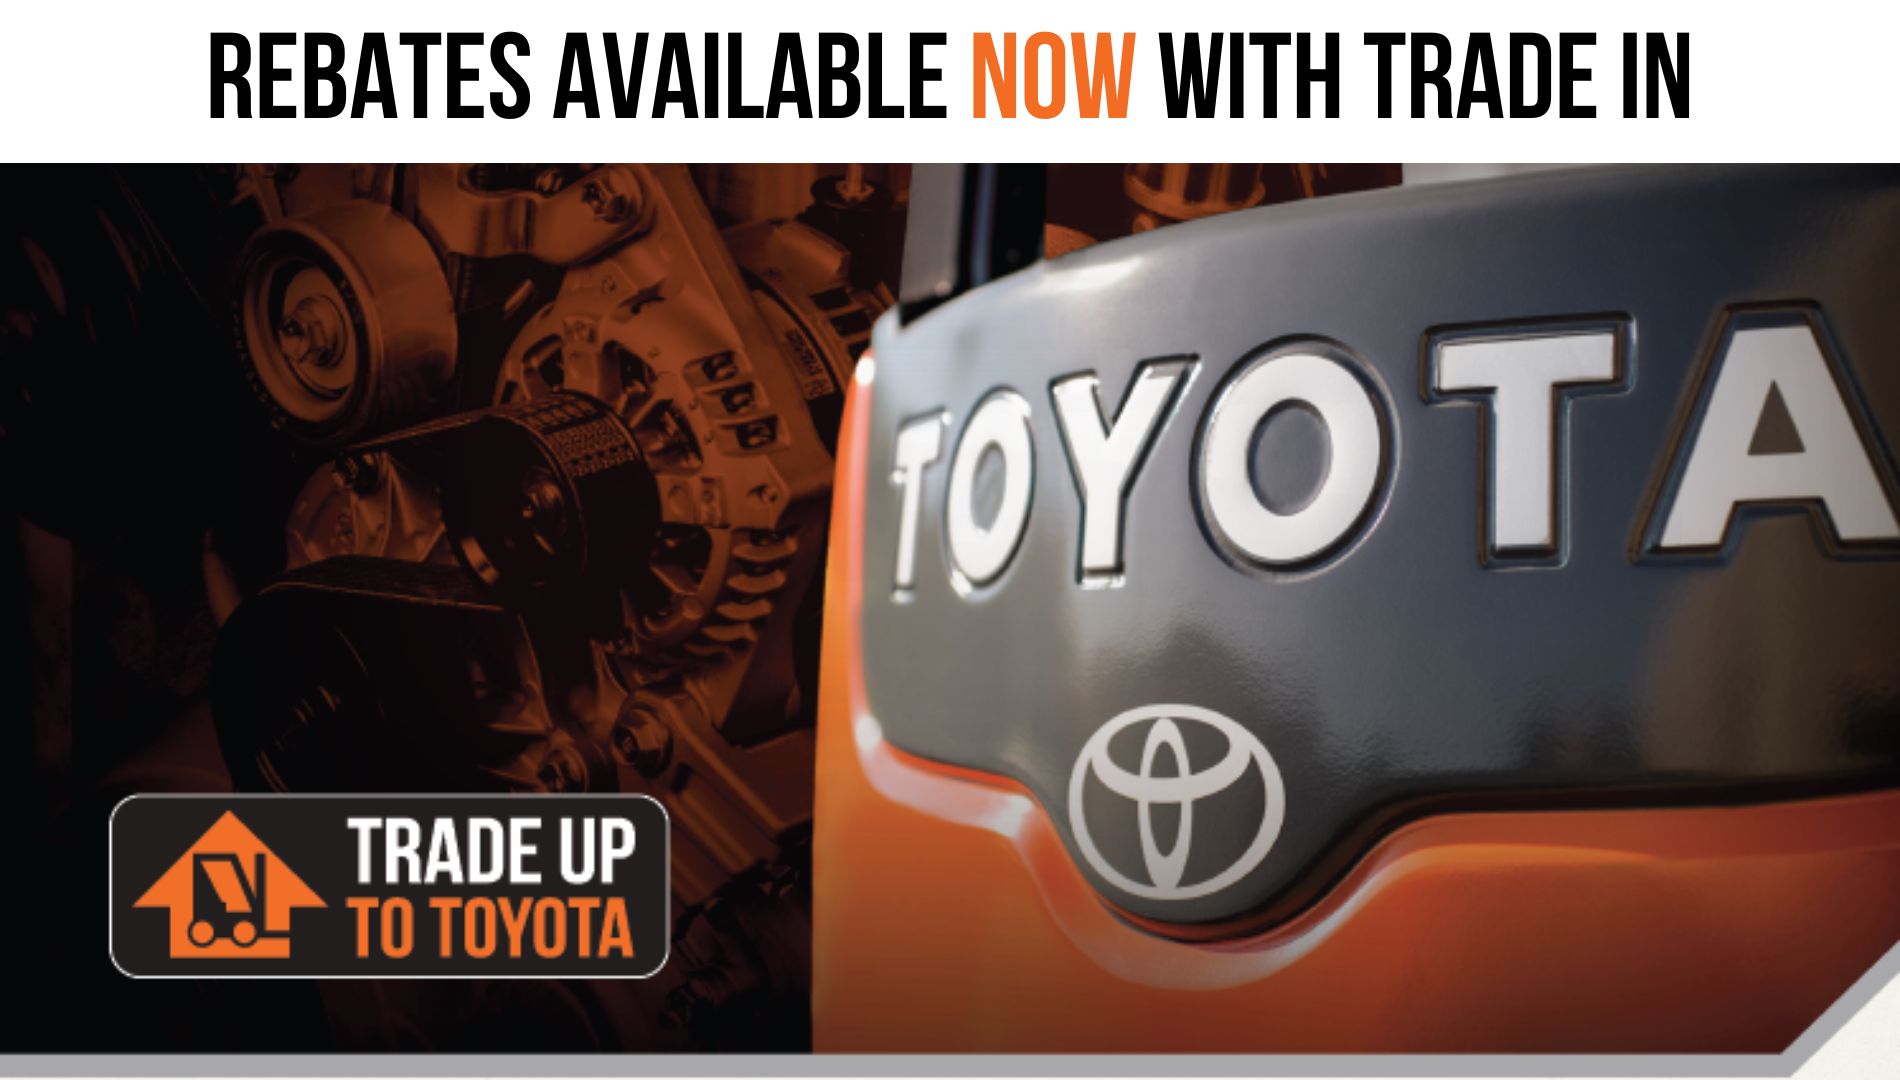 Blog post - Trade Up to Toyota